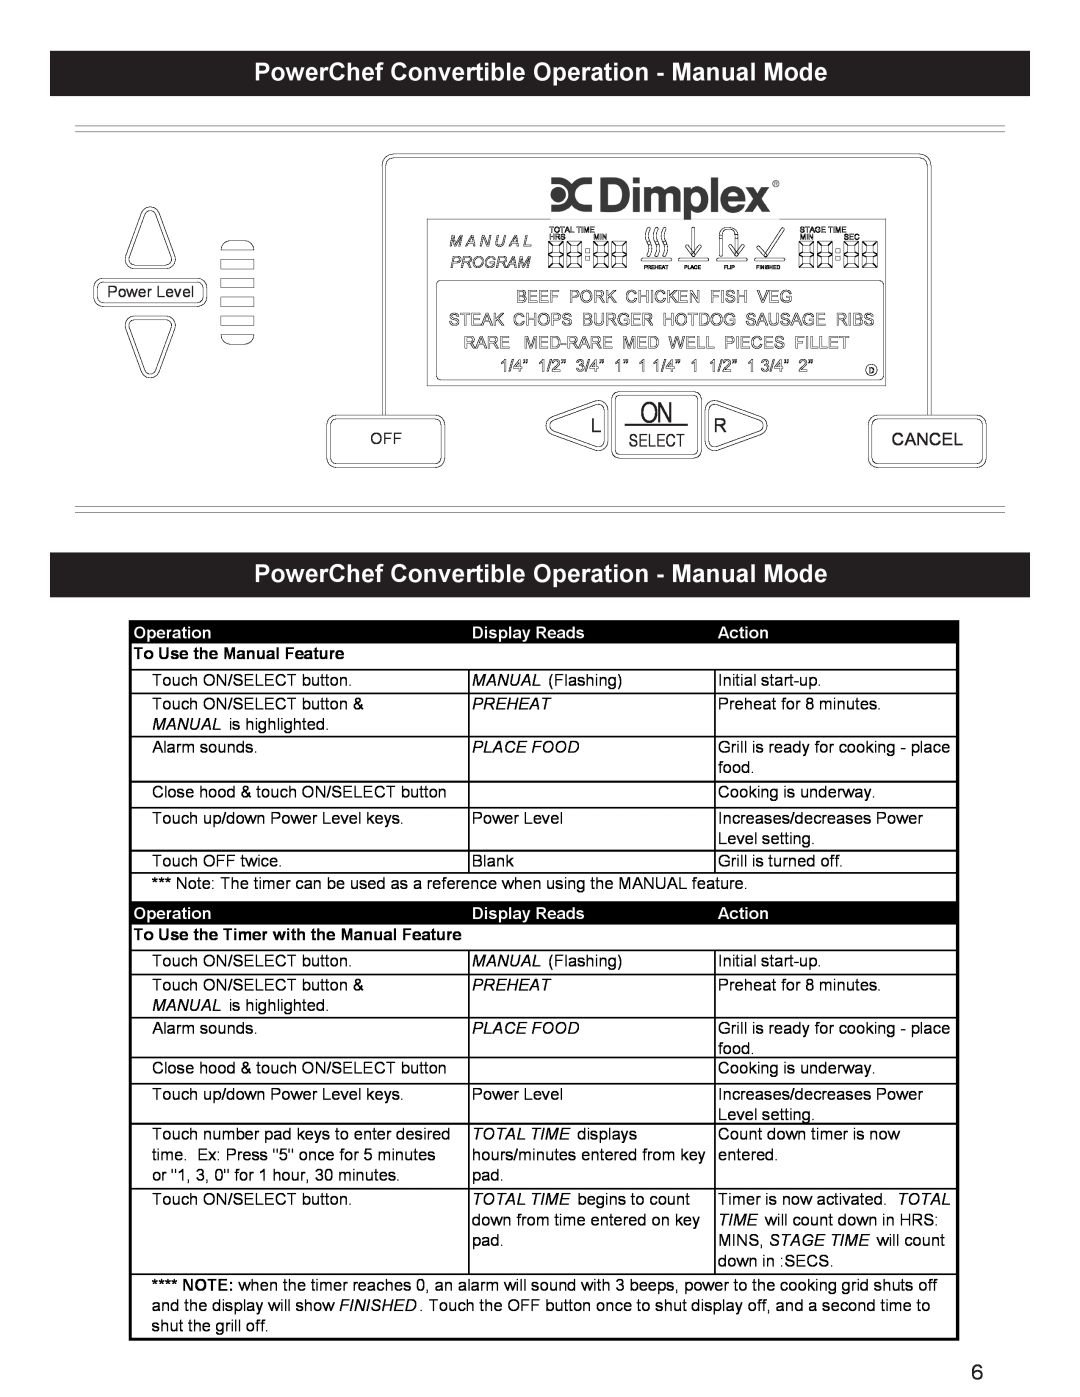 Dimplex CBQ-120-ELEM PowerChef Convertible Operation - Manual Mode, Display Reads, Action, To Use the Manual Feature 